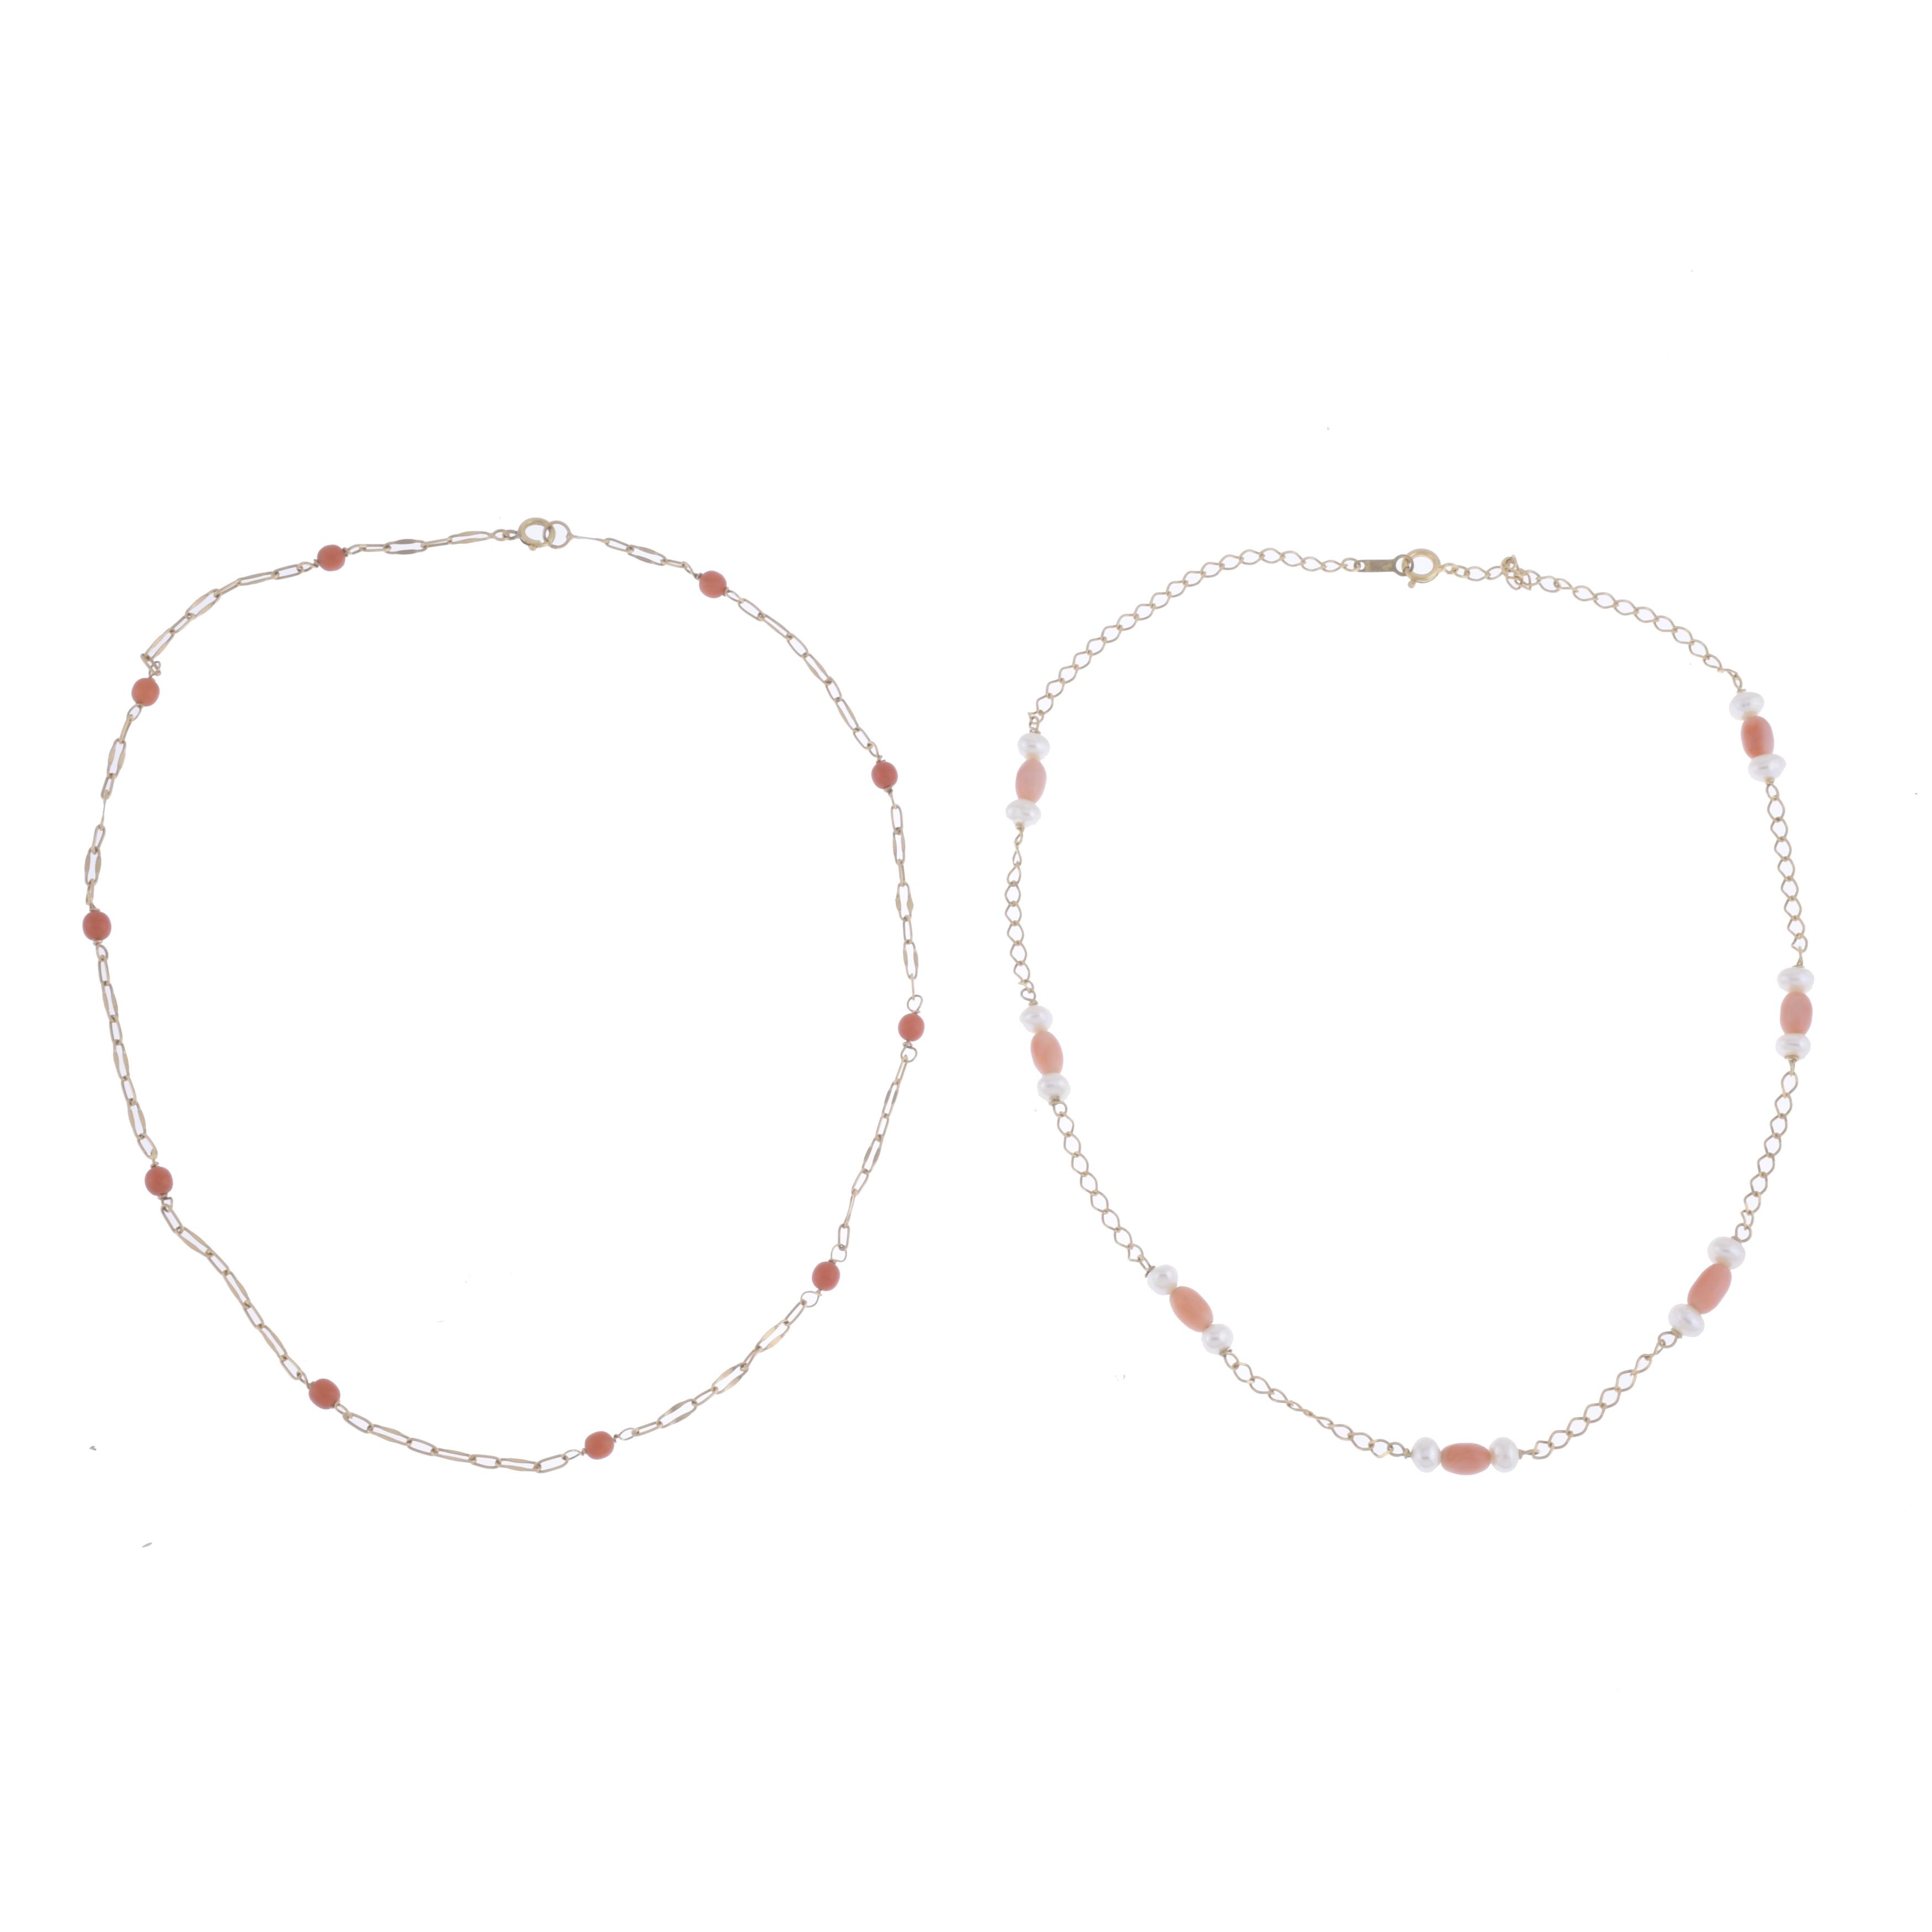 TWO NECKLACES WITH CORAL BEADS